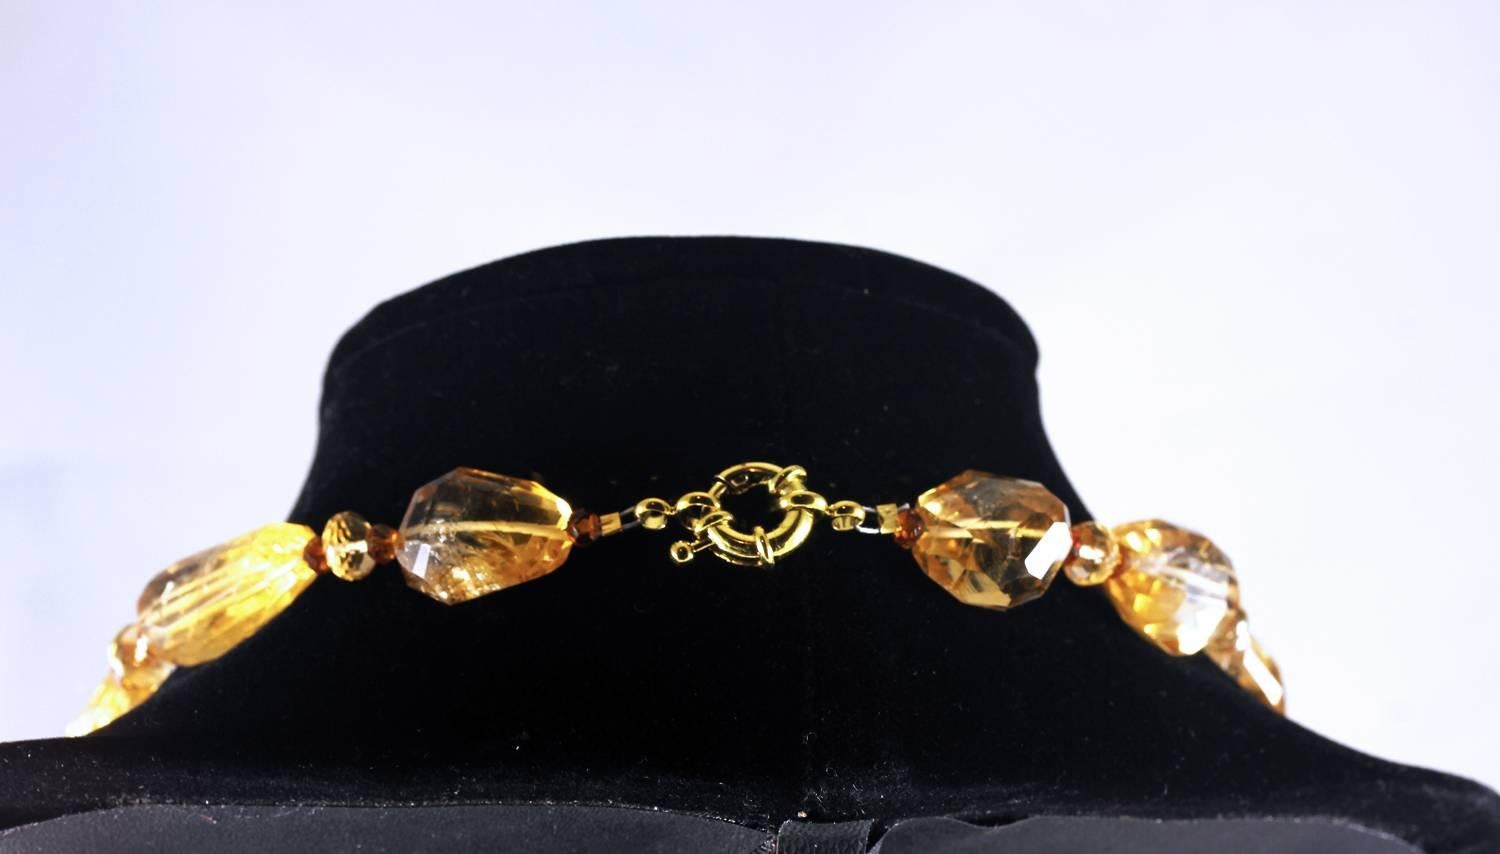 Highly polished chunks of Citrine honey color gemstones enhanced with gem cut sparkling smaller Citrine and Spessartite Garnets complete this beautiful almost choker style necklace..
Size:  graduated to approximately 22 mm x 13.5 mm